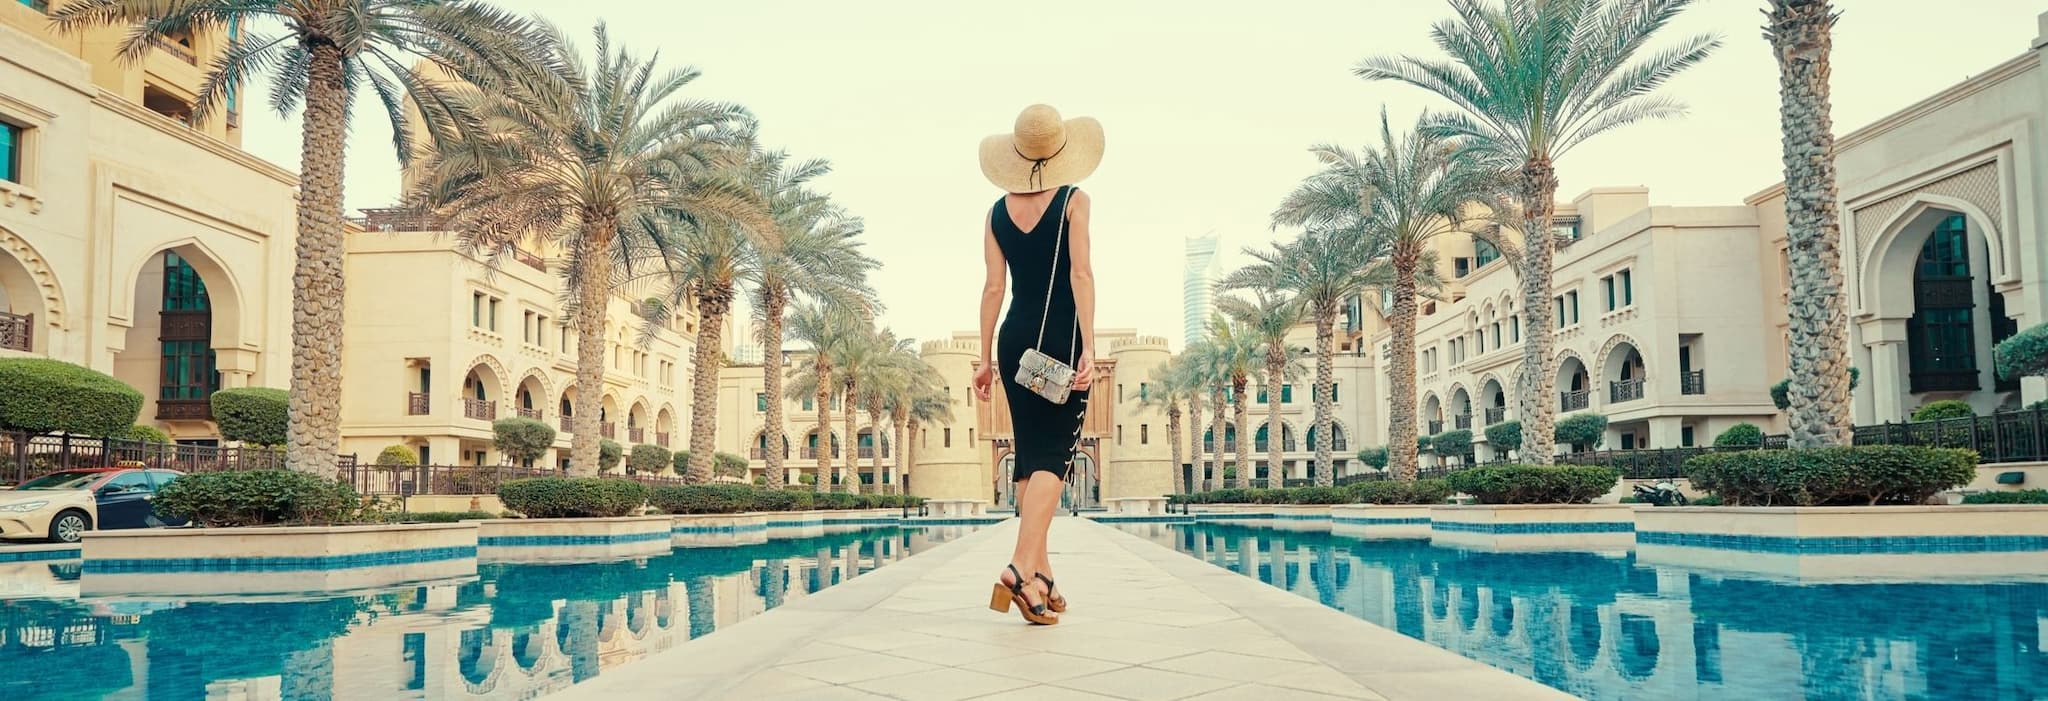 Useful Tips For Women Travelling Solo To Dubai